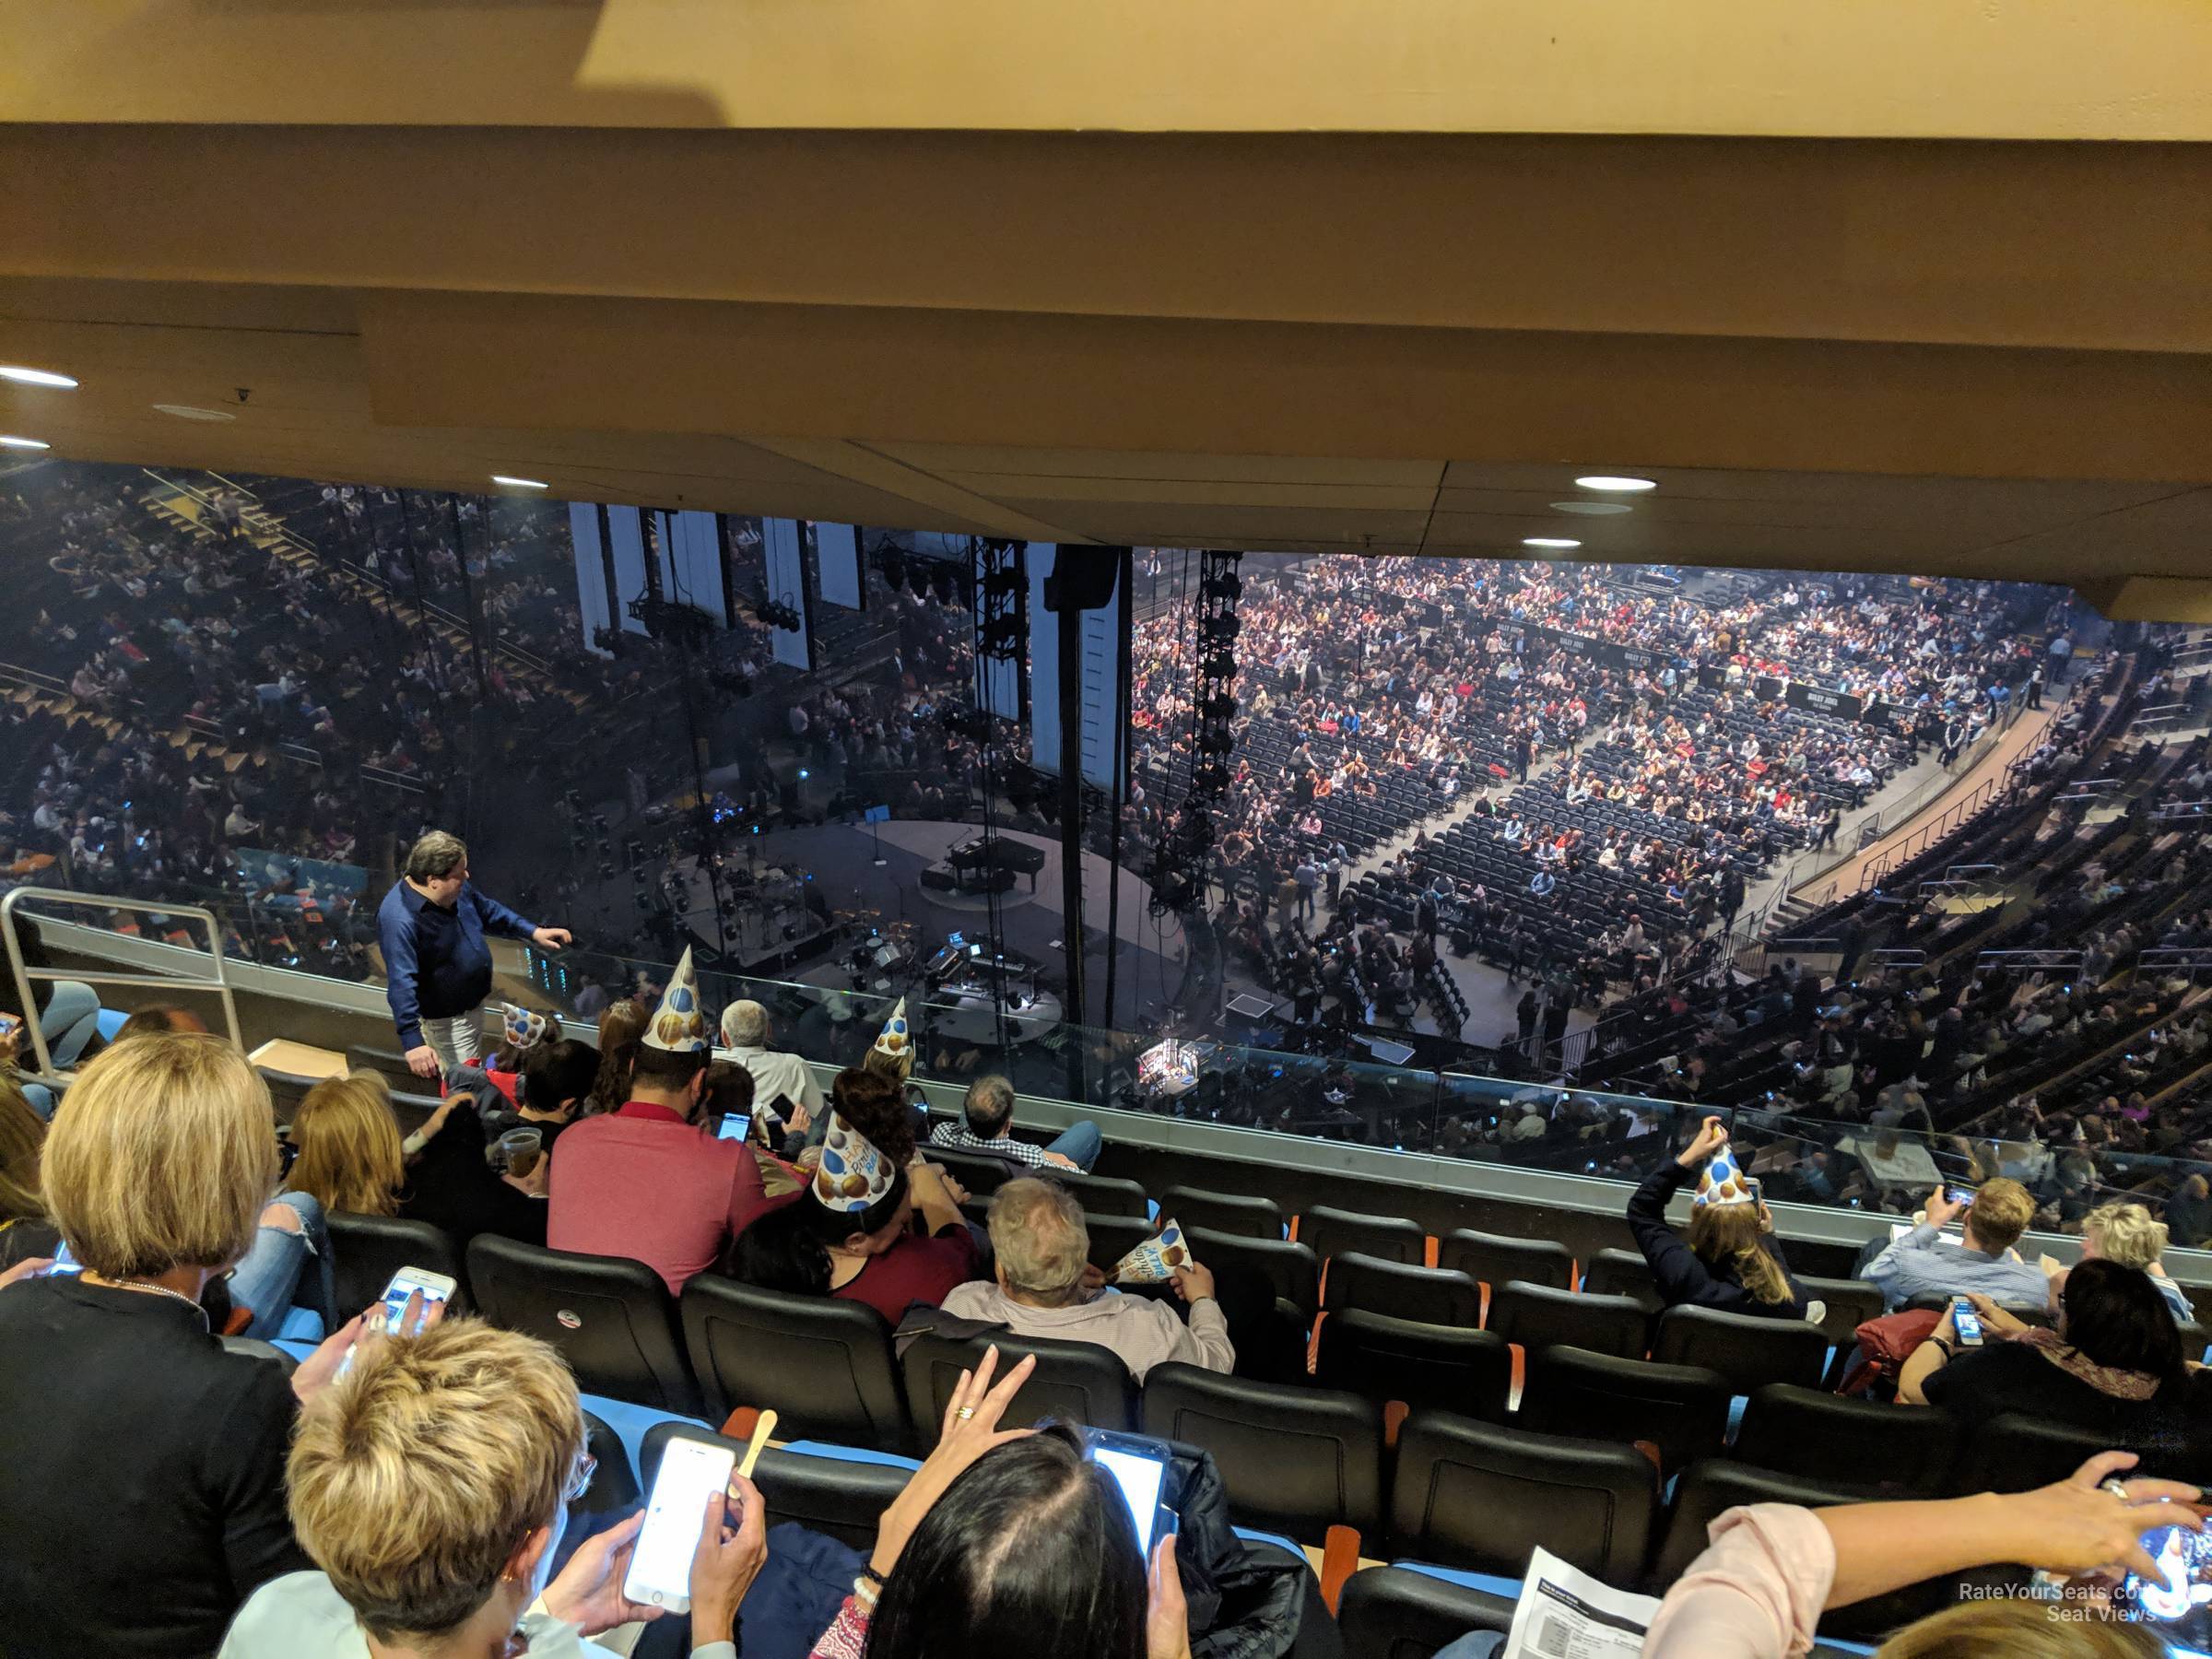 section 420, row 7 seat view  for concert - madison square garden